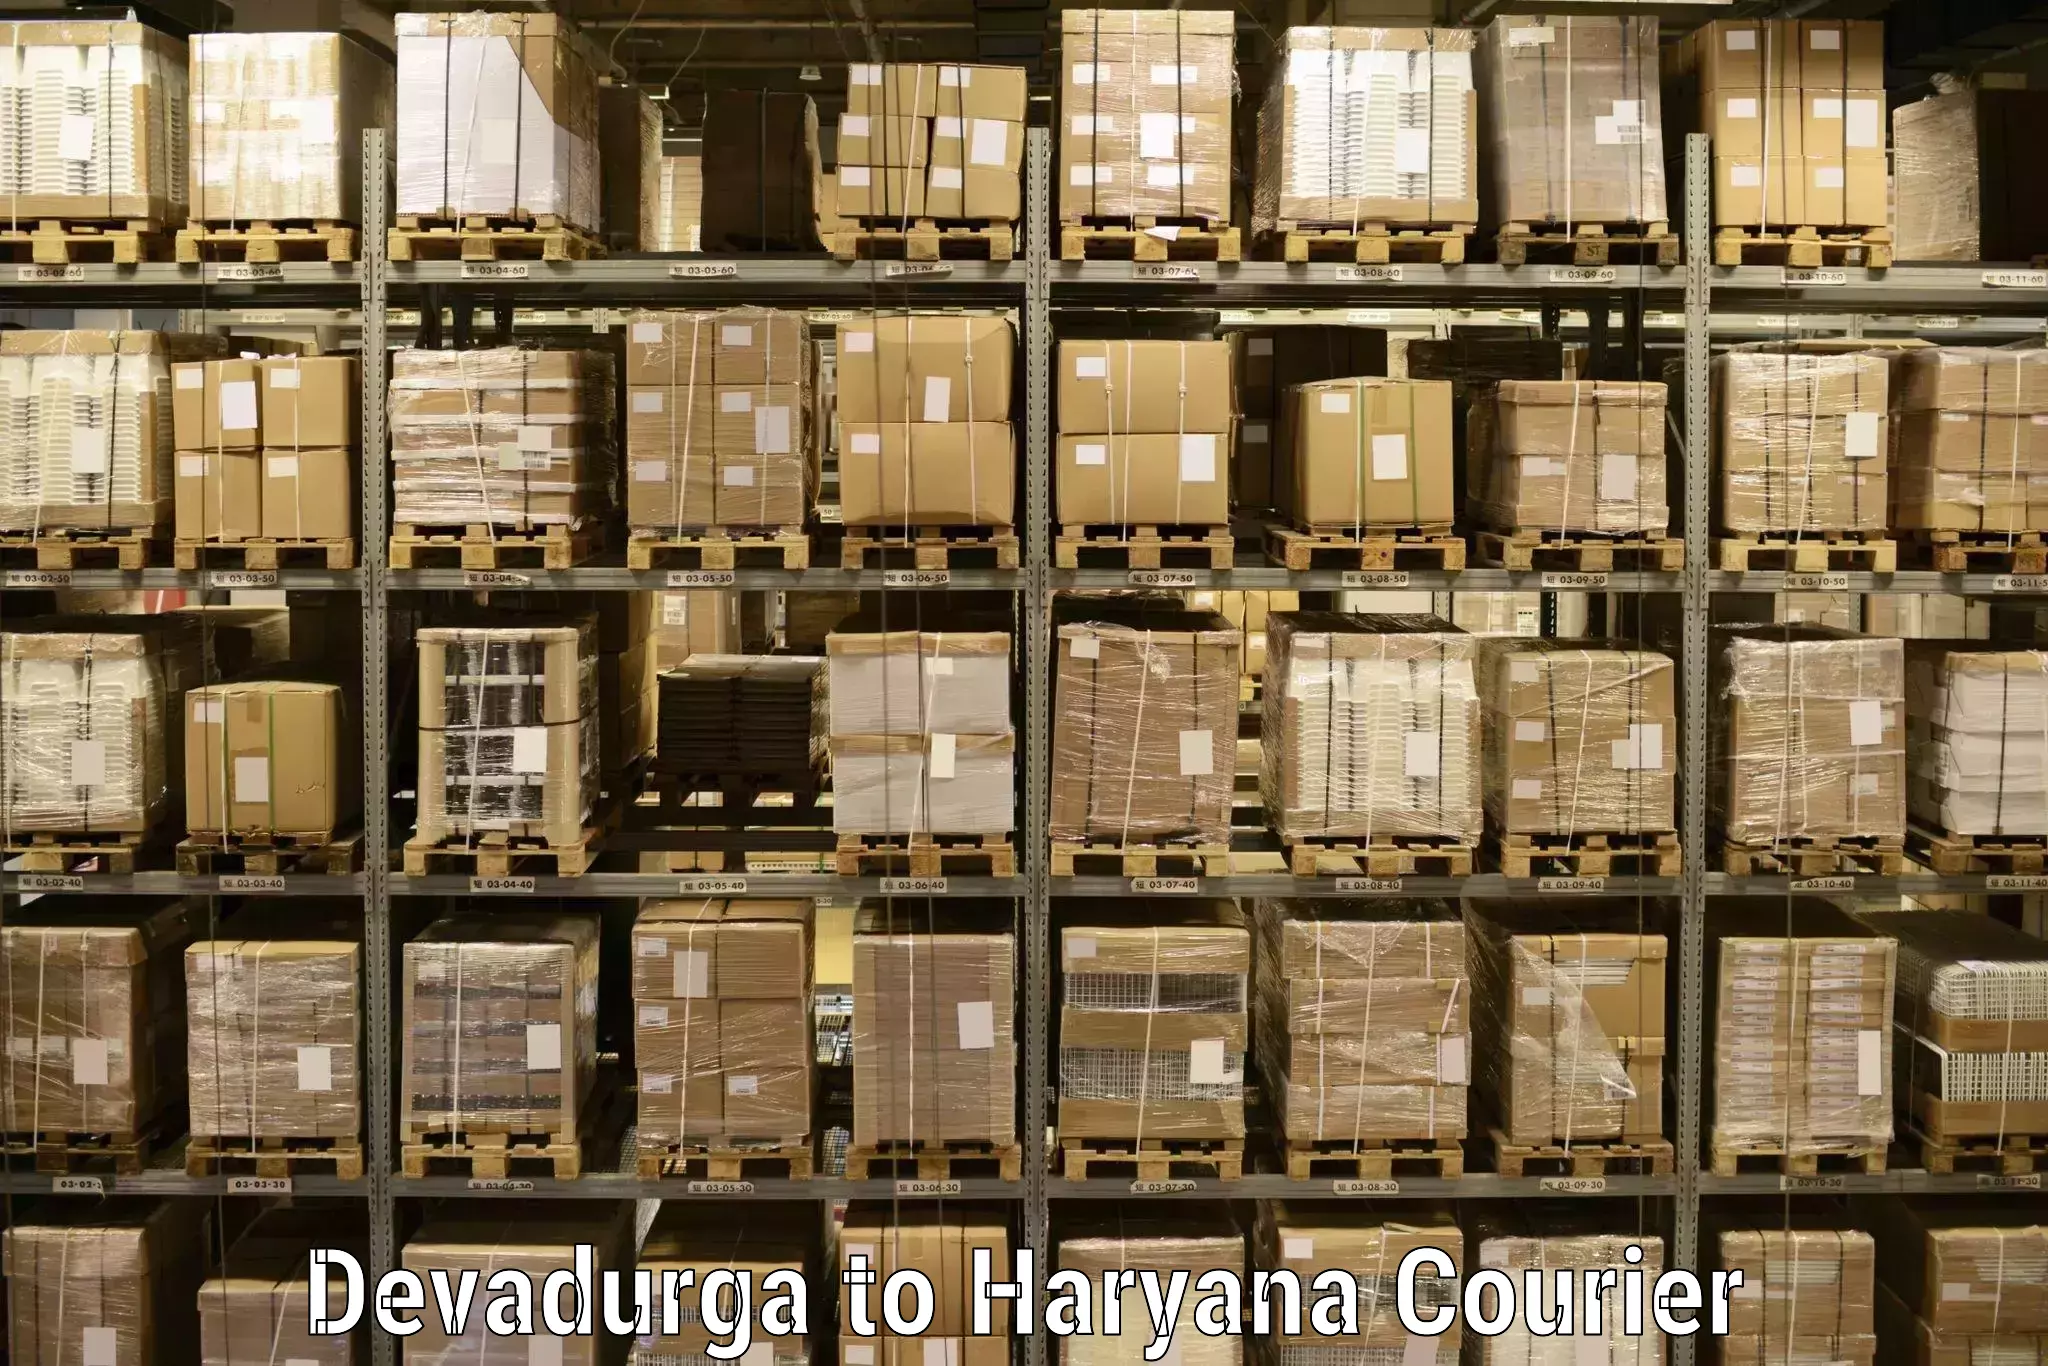 Full-service courier options in Devadurga to Gurgaon